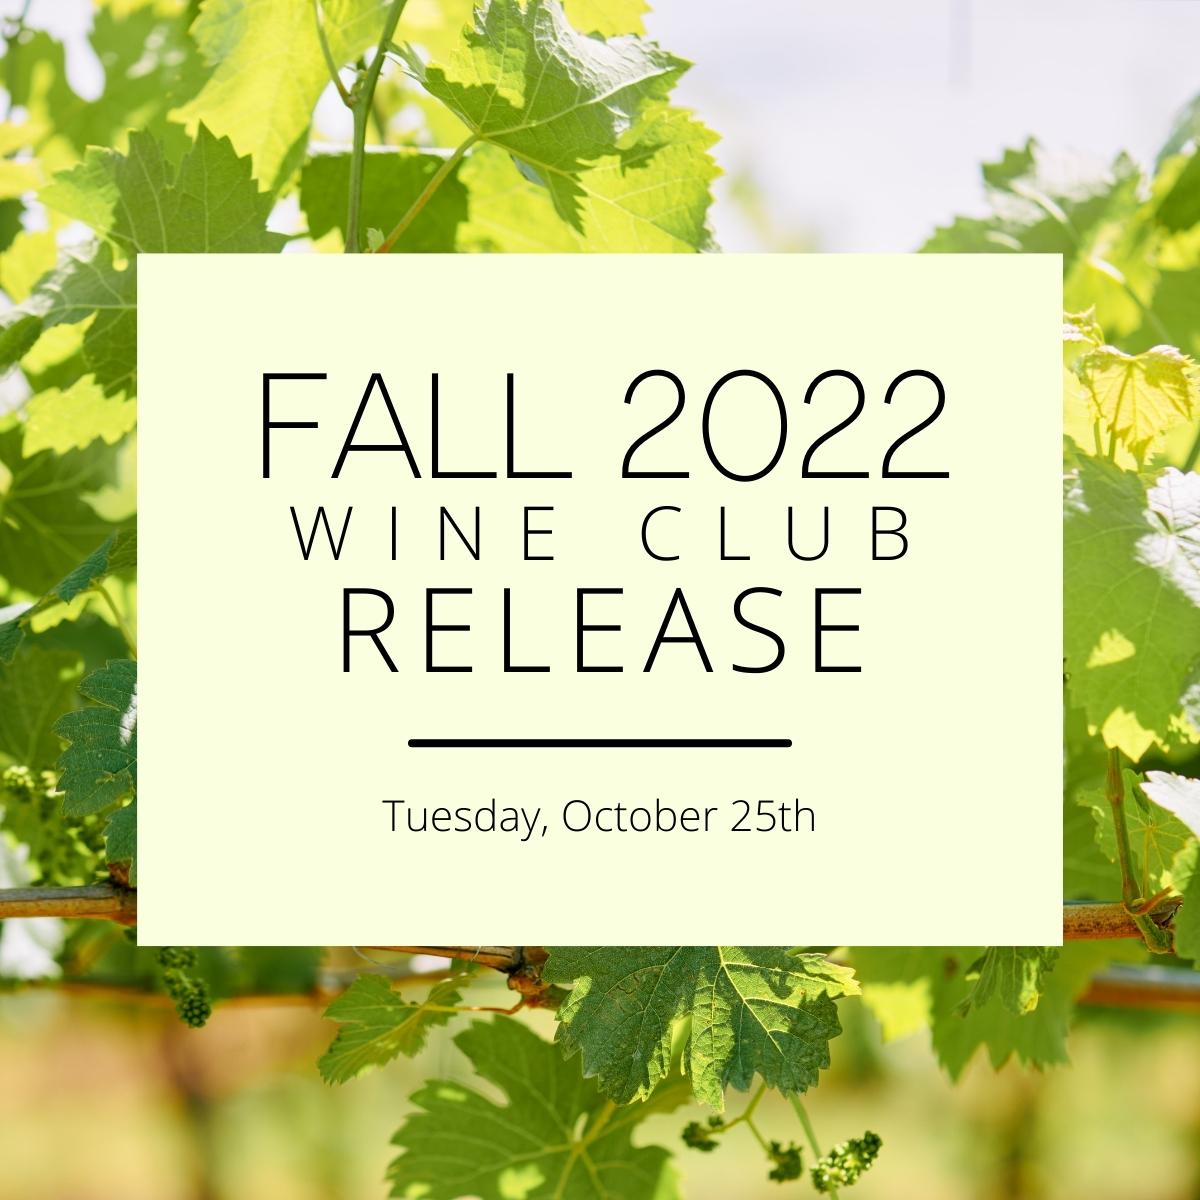 Graphic for Fall 2022 Release Event on Tuesday